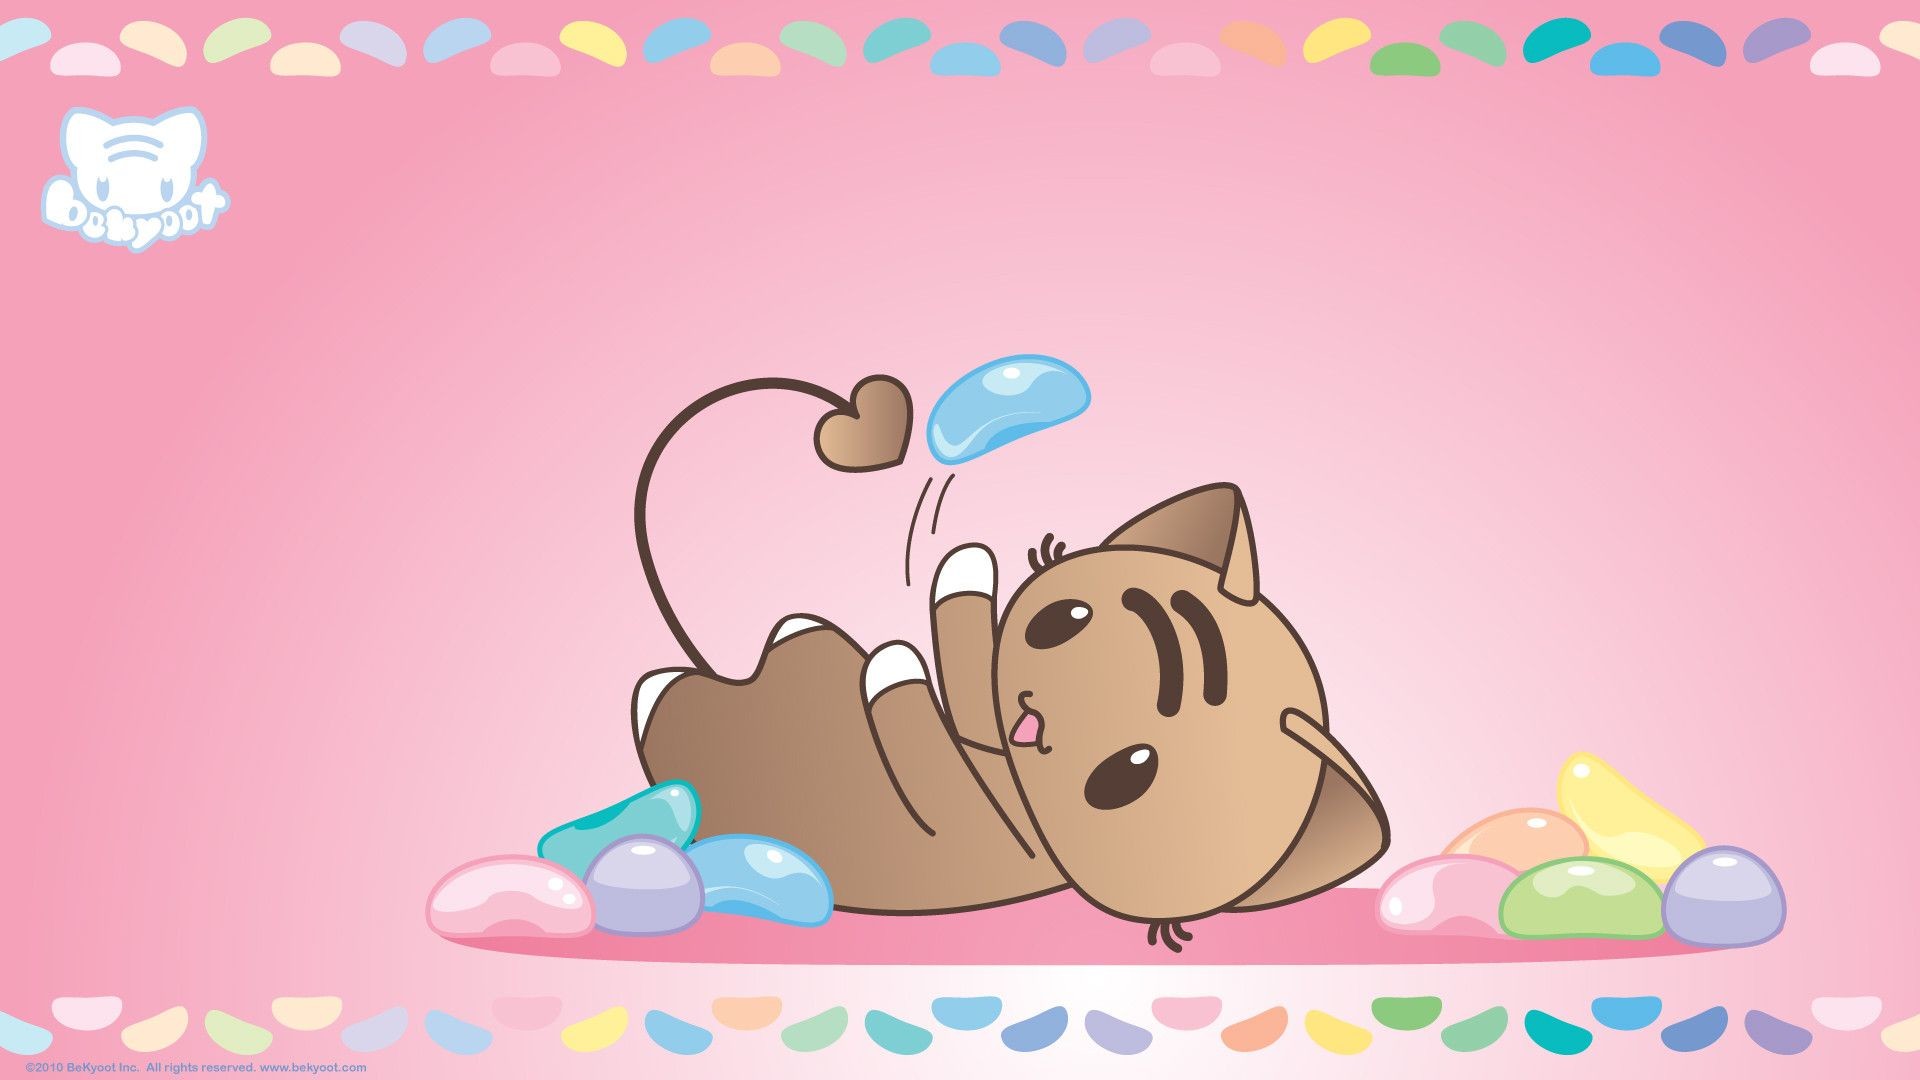 1920x1080 Search Results for “kawaii desktop wallpapers free” – Adorable Wallpapers